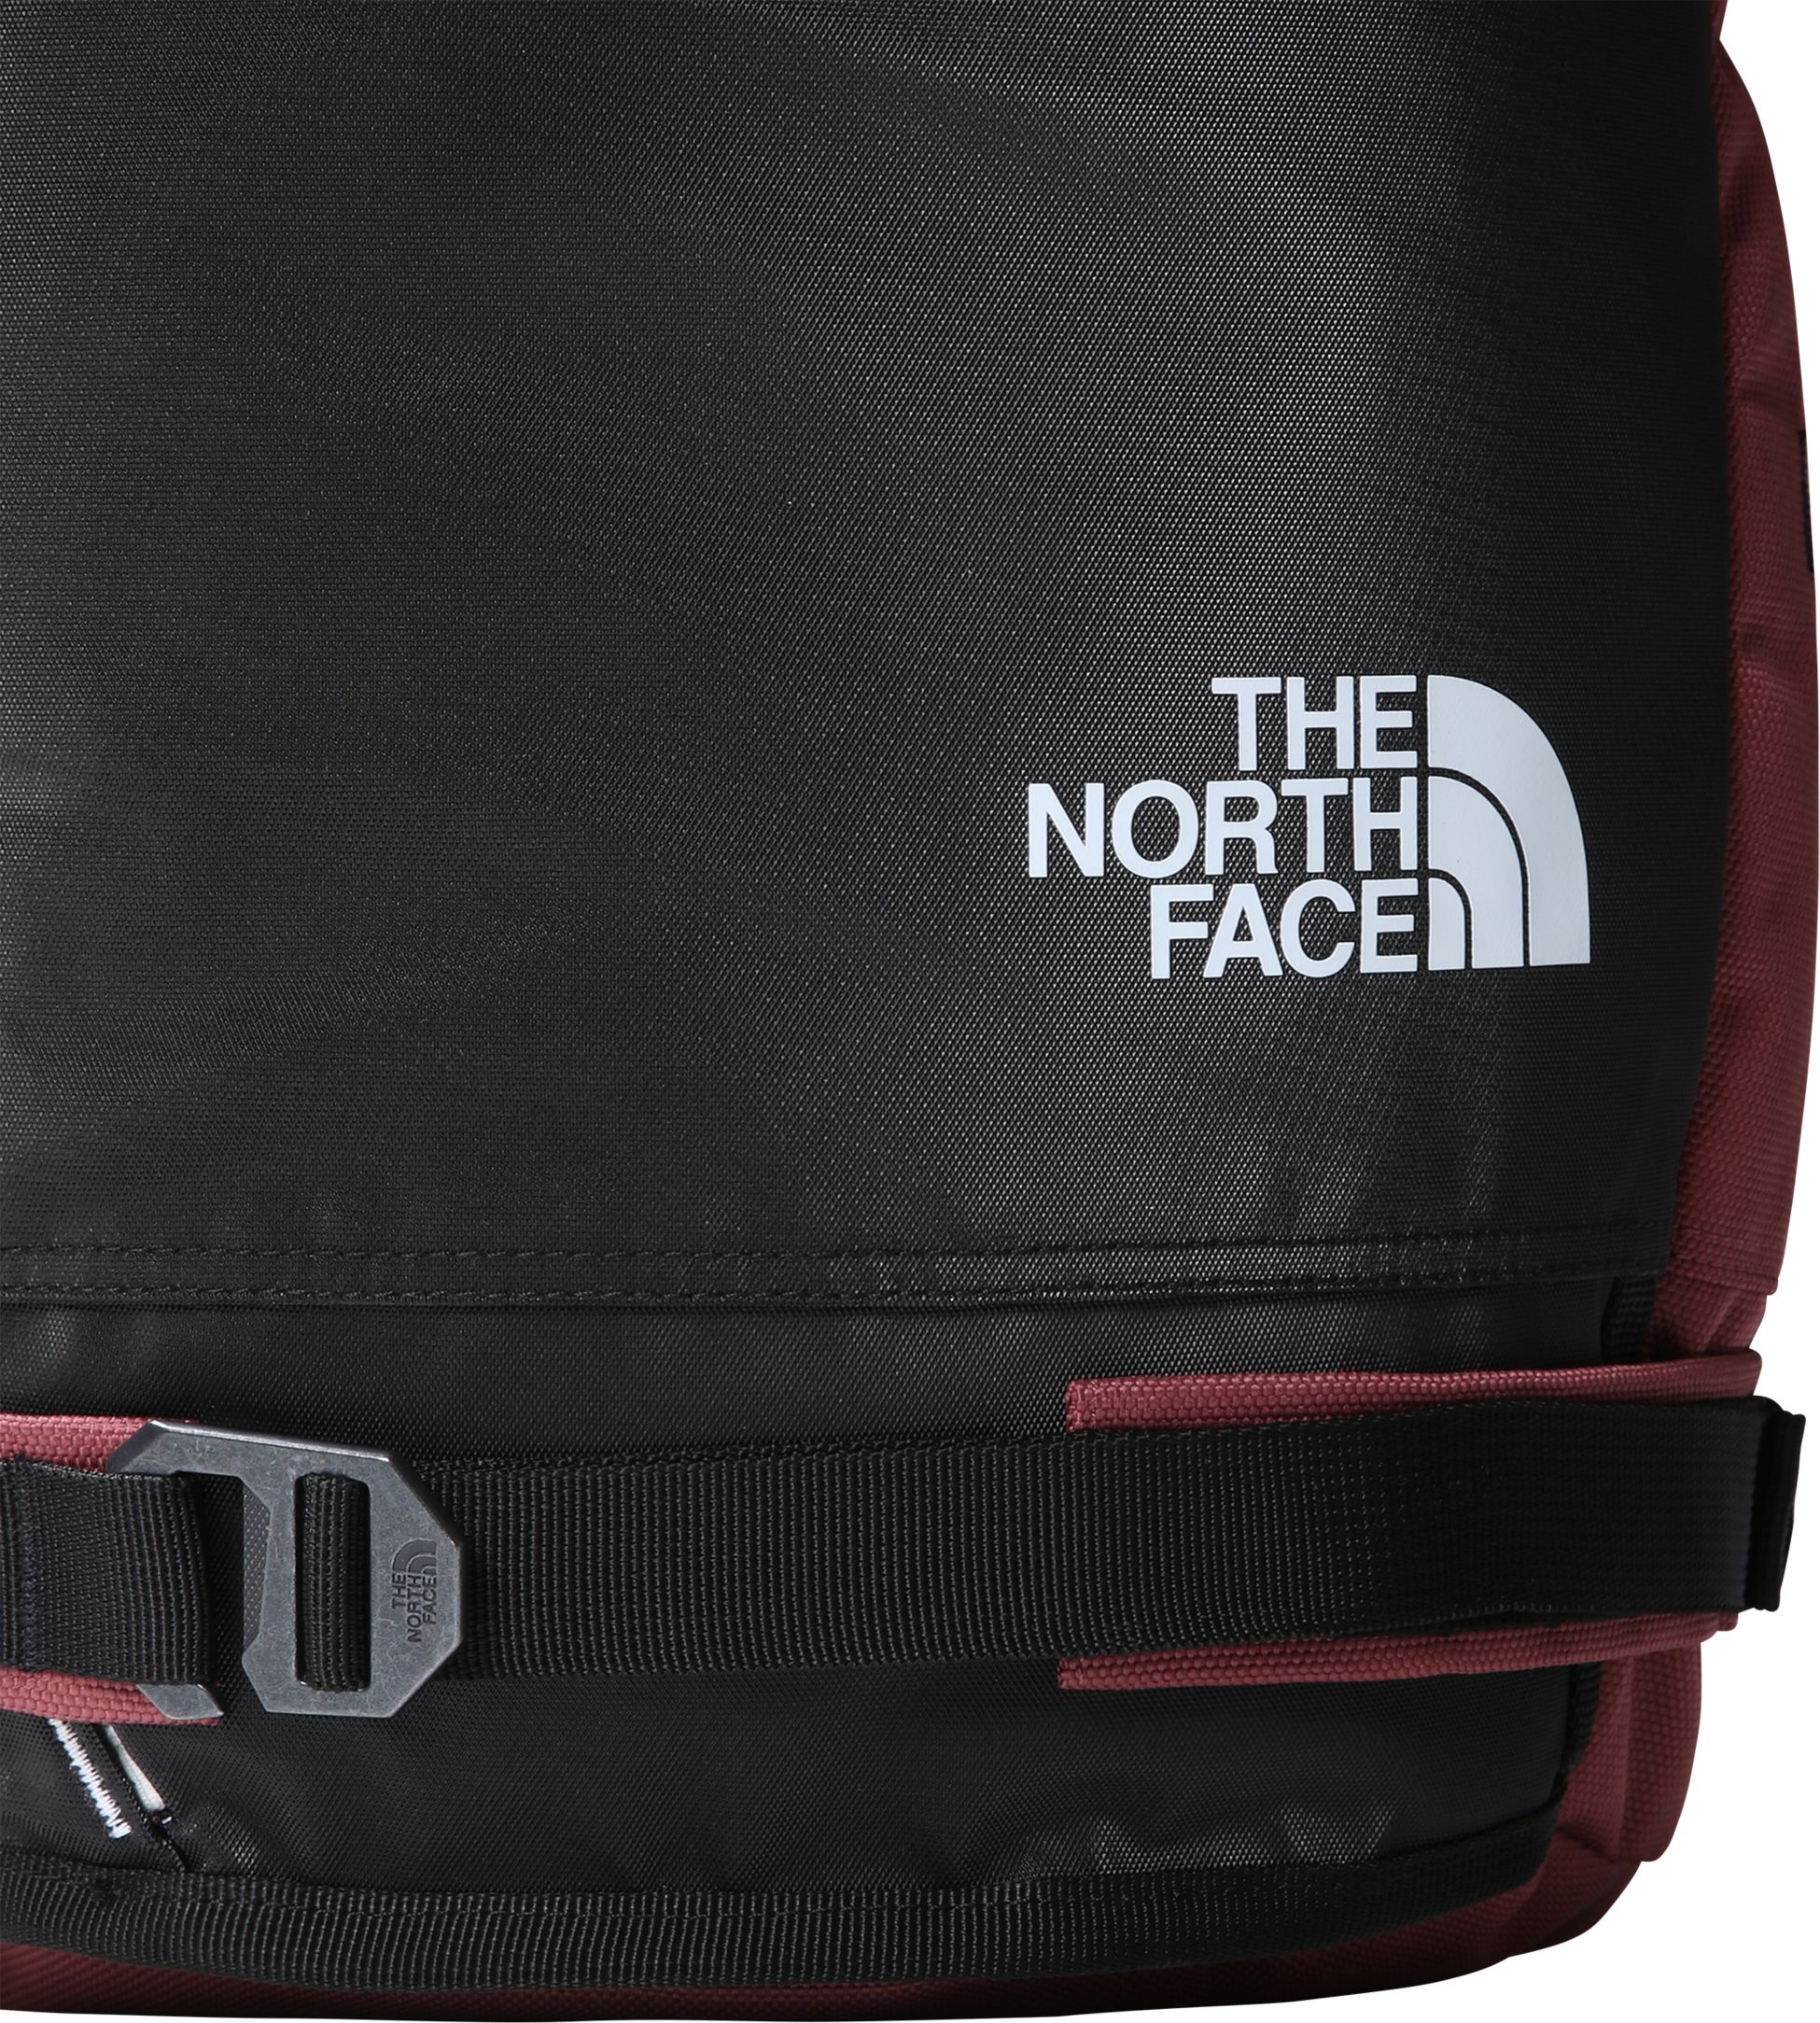 THE NORTH FACE, SLACKPACK 2.0